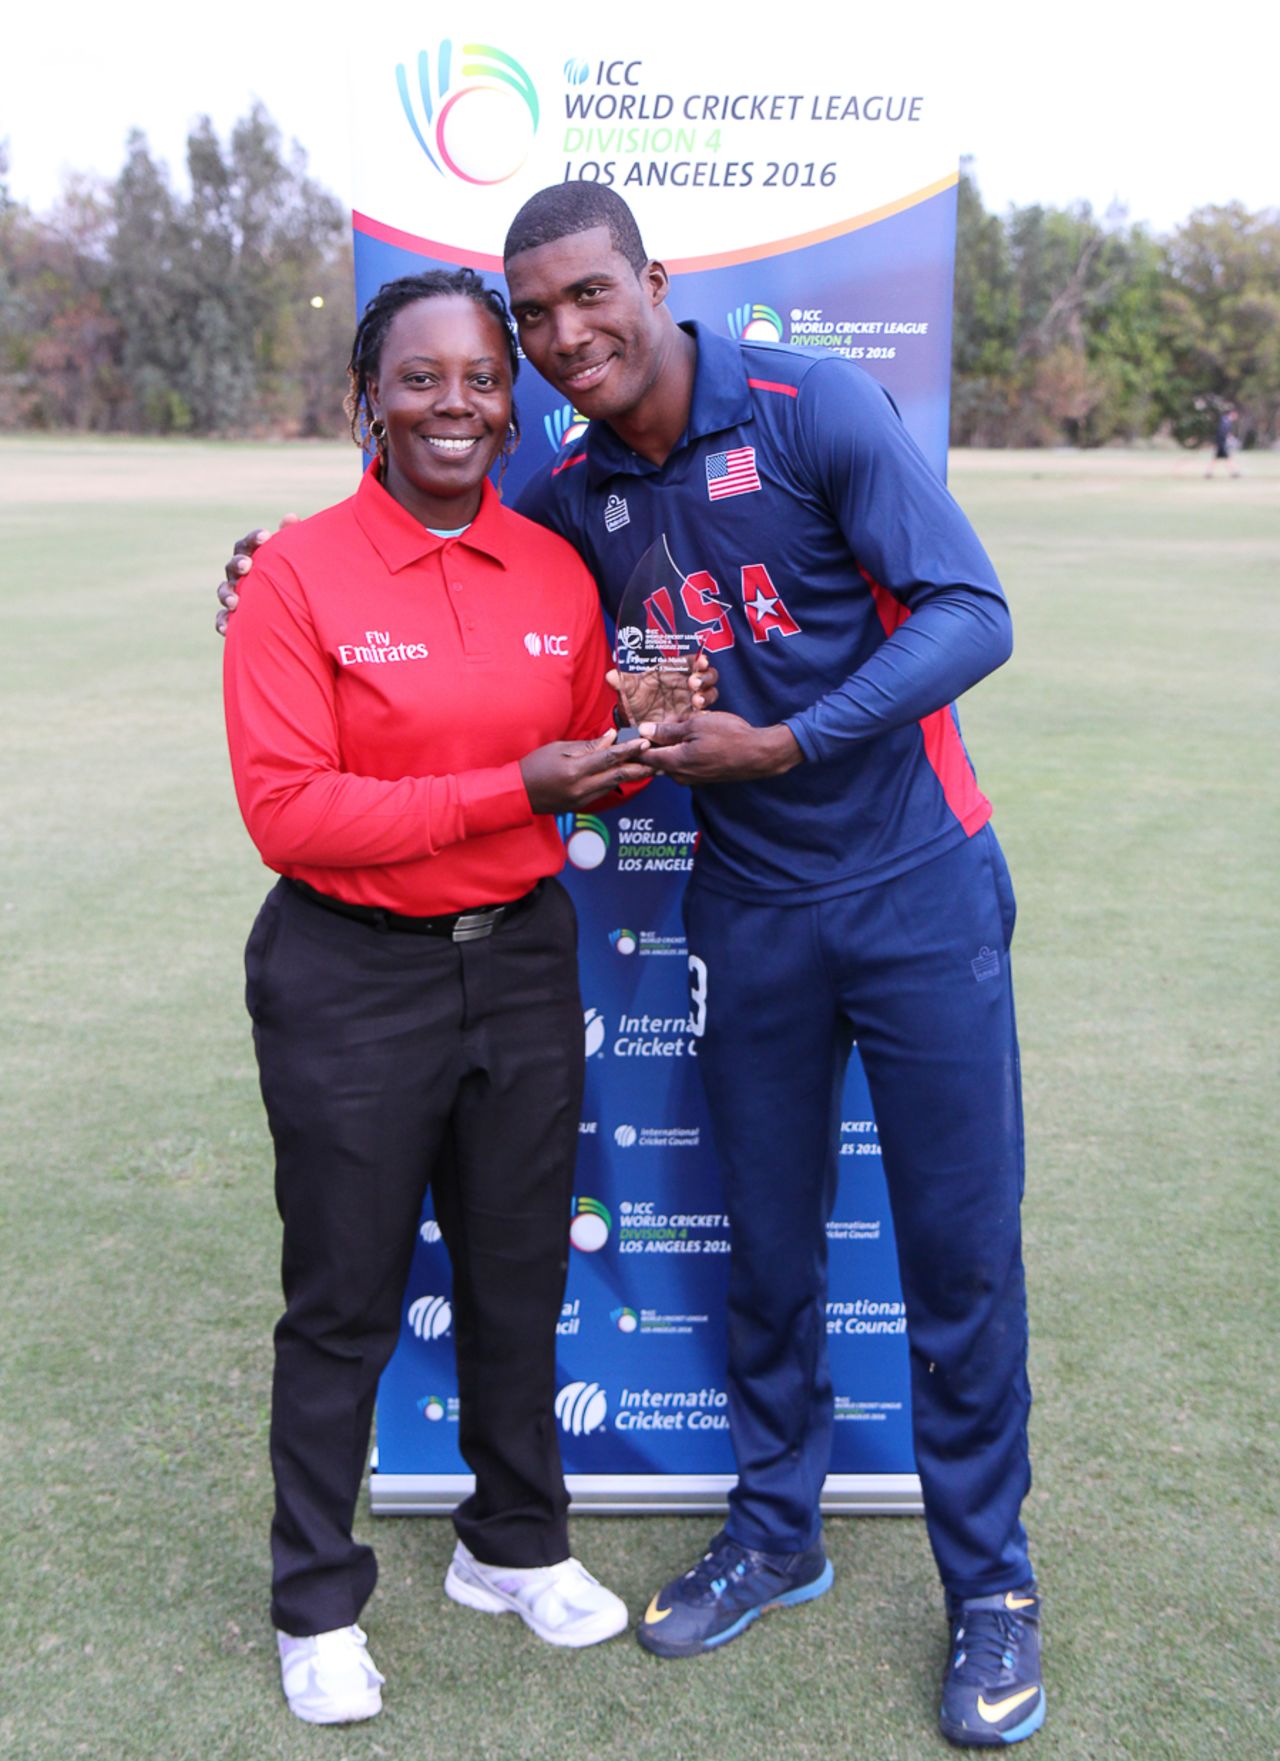 Timroy Allen accepts the Man of the Match award from umpire Jacqueline Williams, USA v Italy, ICC World Cricket League Division Four, Los Angeles, October 30, 2016